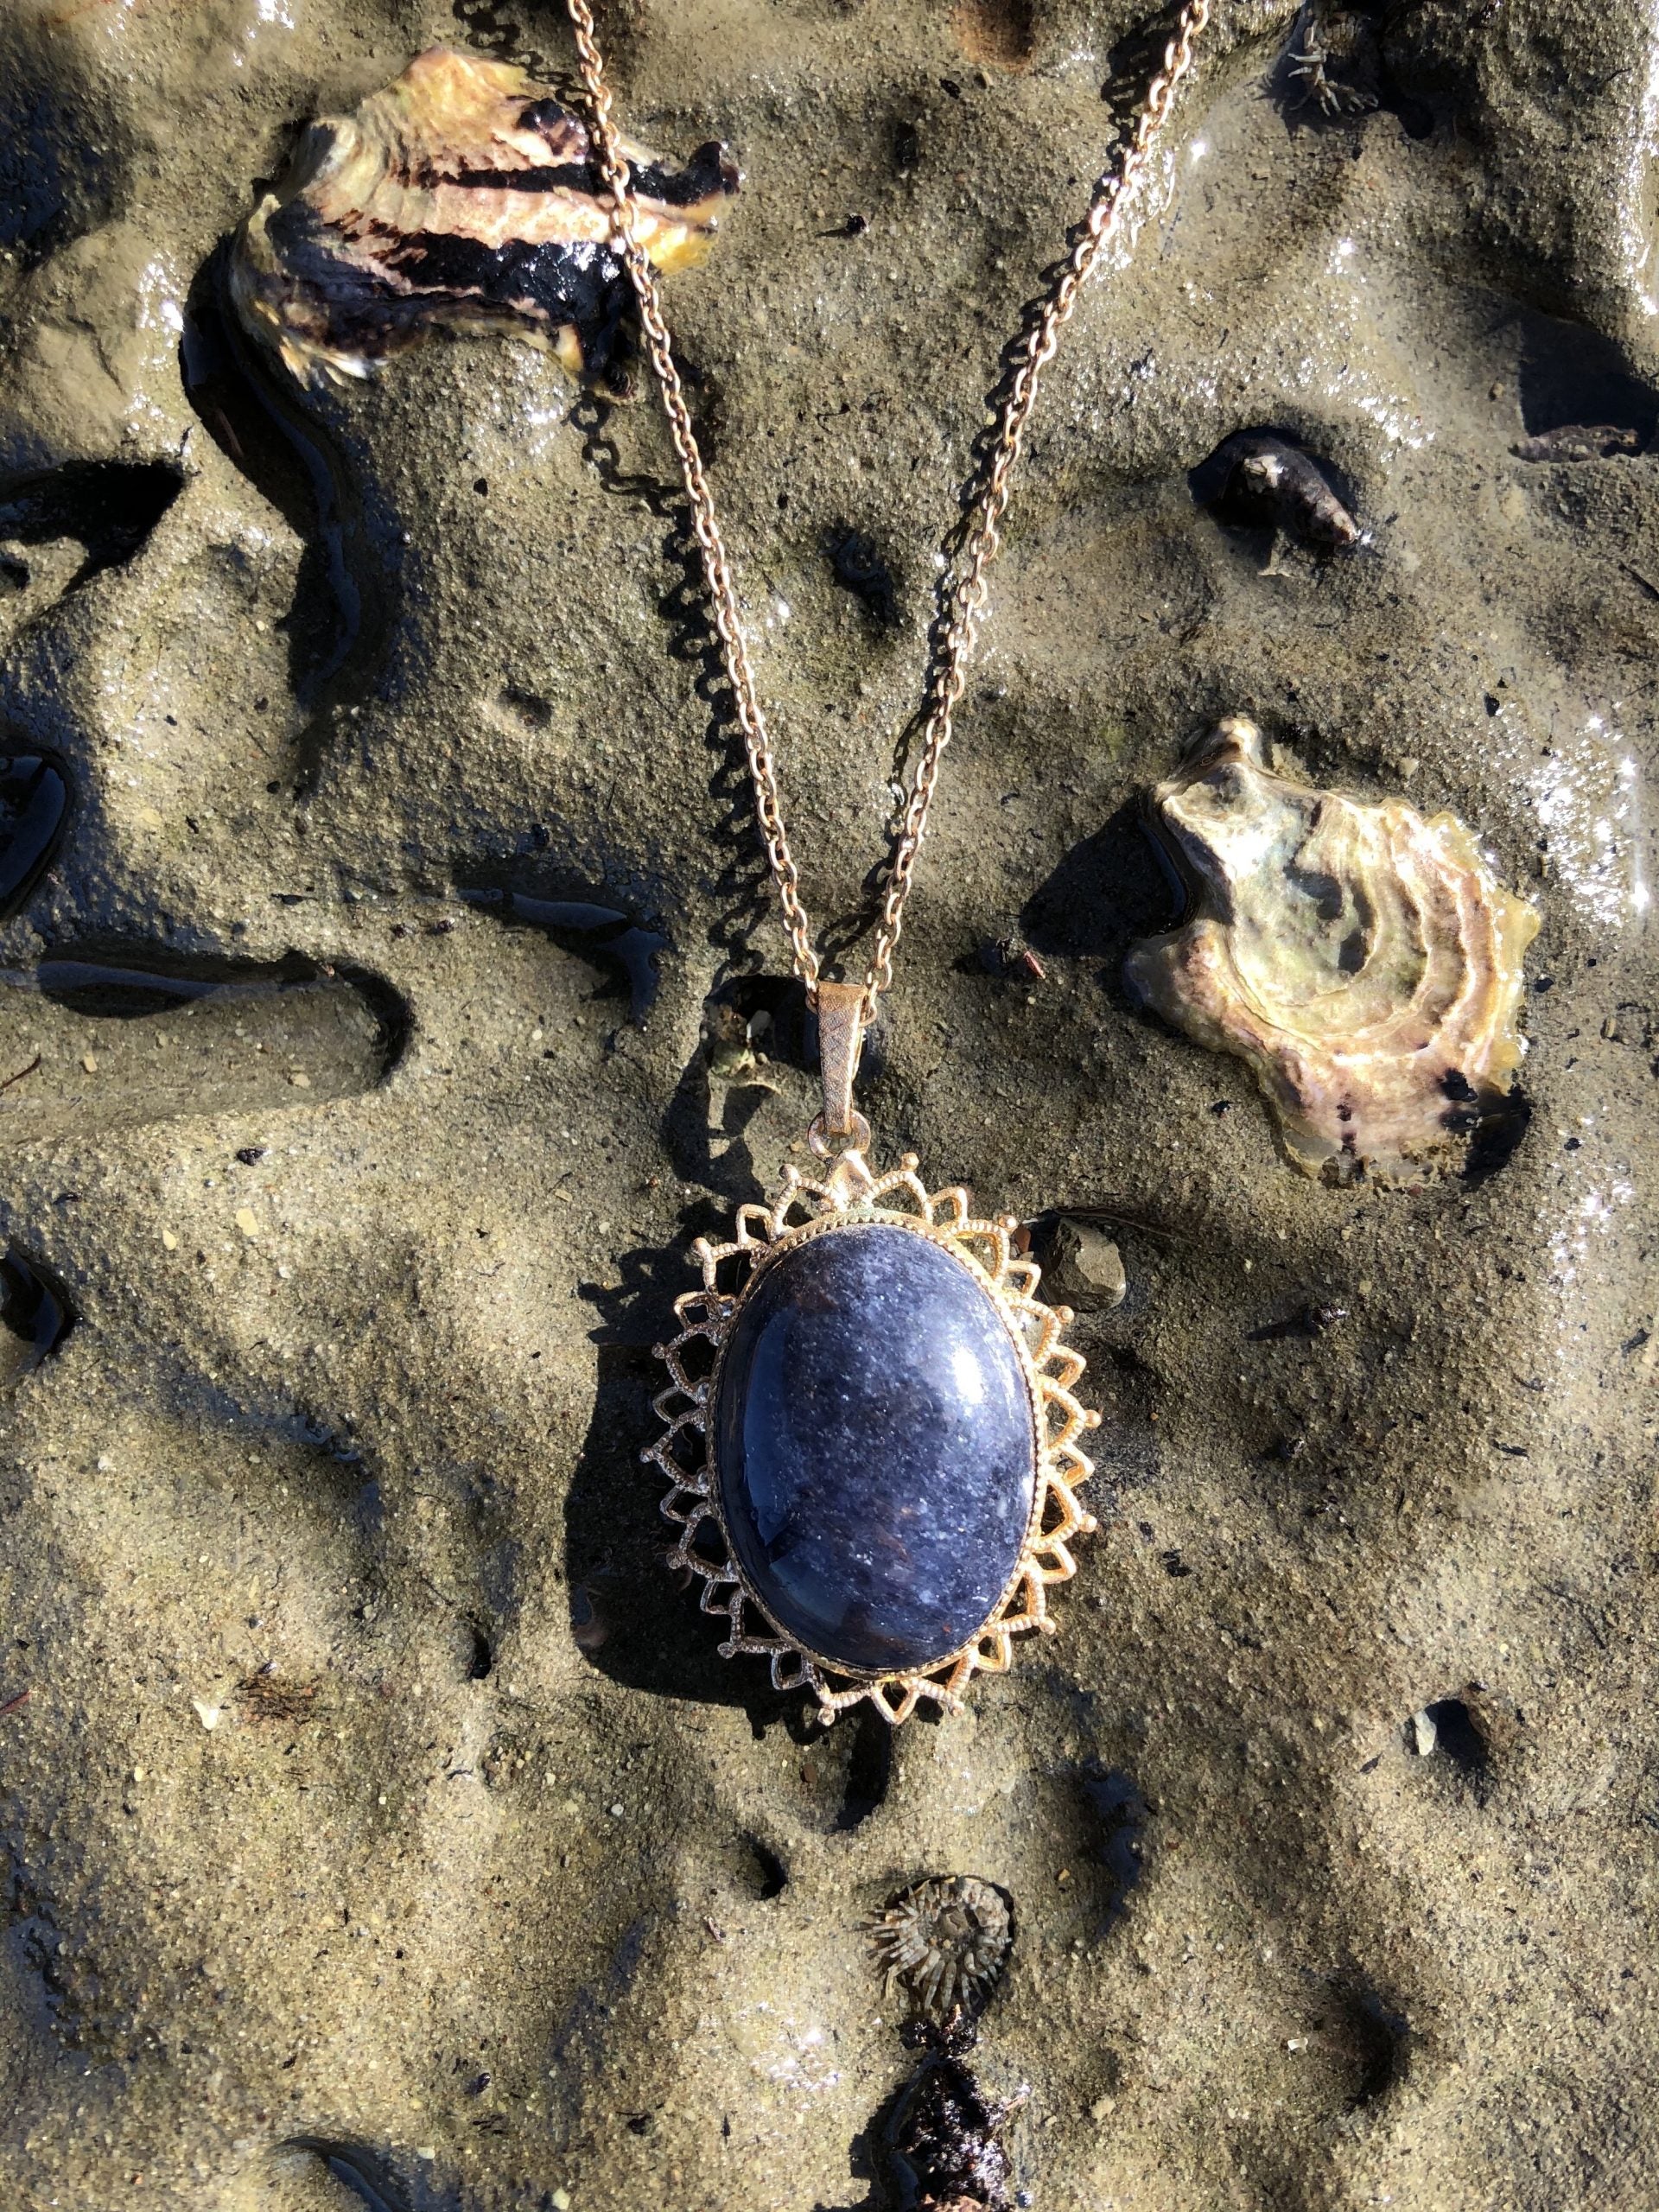 Necklace with natural blue aventurine, hand polished to a 25x18mm cabochon and set in a gold plated setting with 19 inch chain, on sand